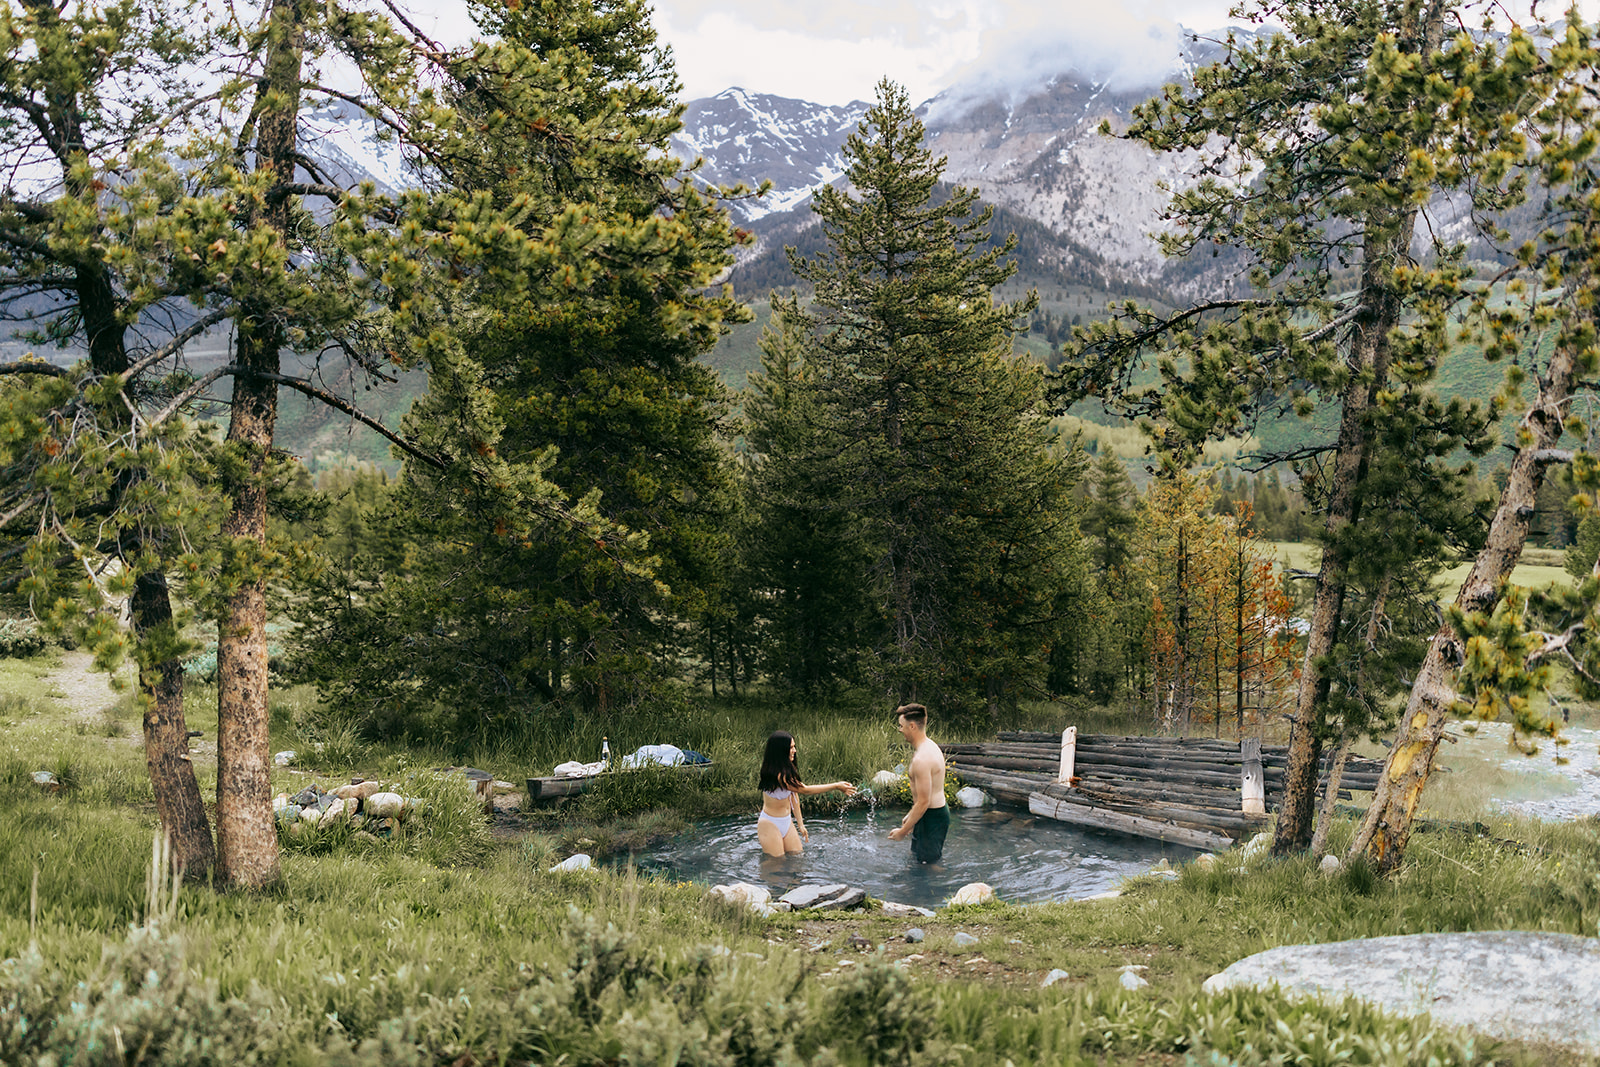 Picnic Engagement Session in the Idaho Mountains